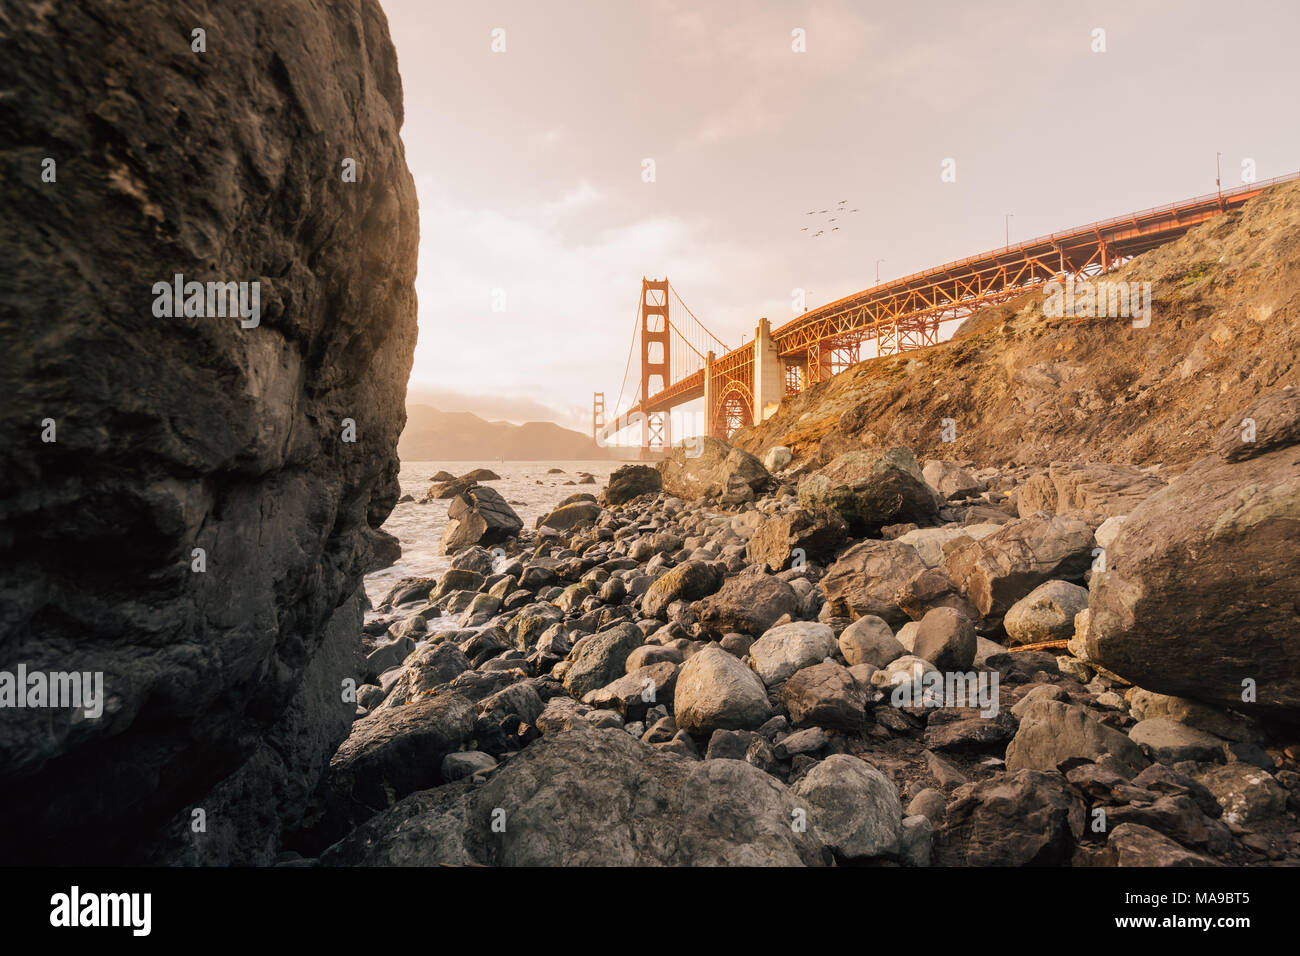 Timeless, colorful sunset view of  Classic American city landmark icon the Golden Gate Bridge Golden Hour Sunset in San Francisco, California Stock Photo